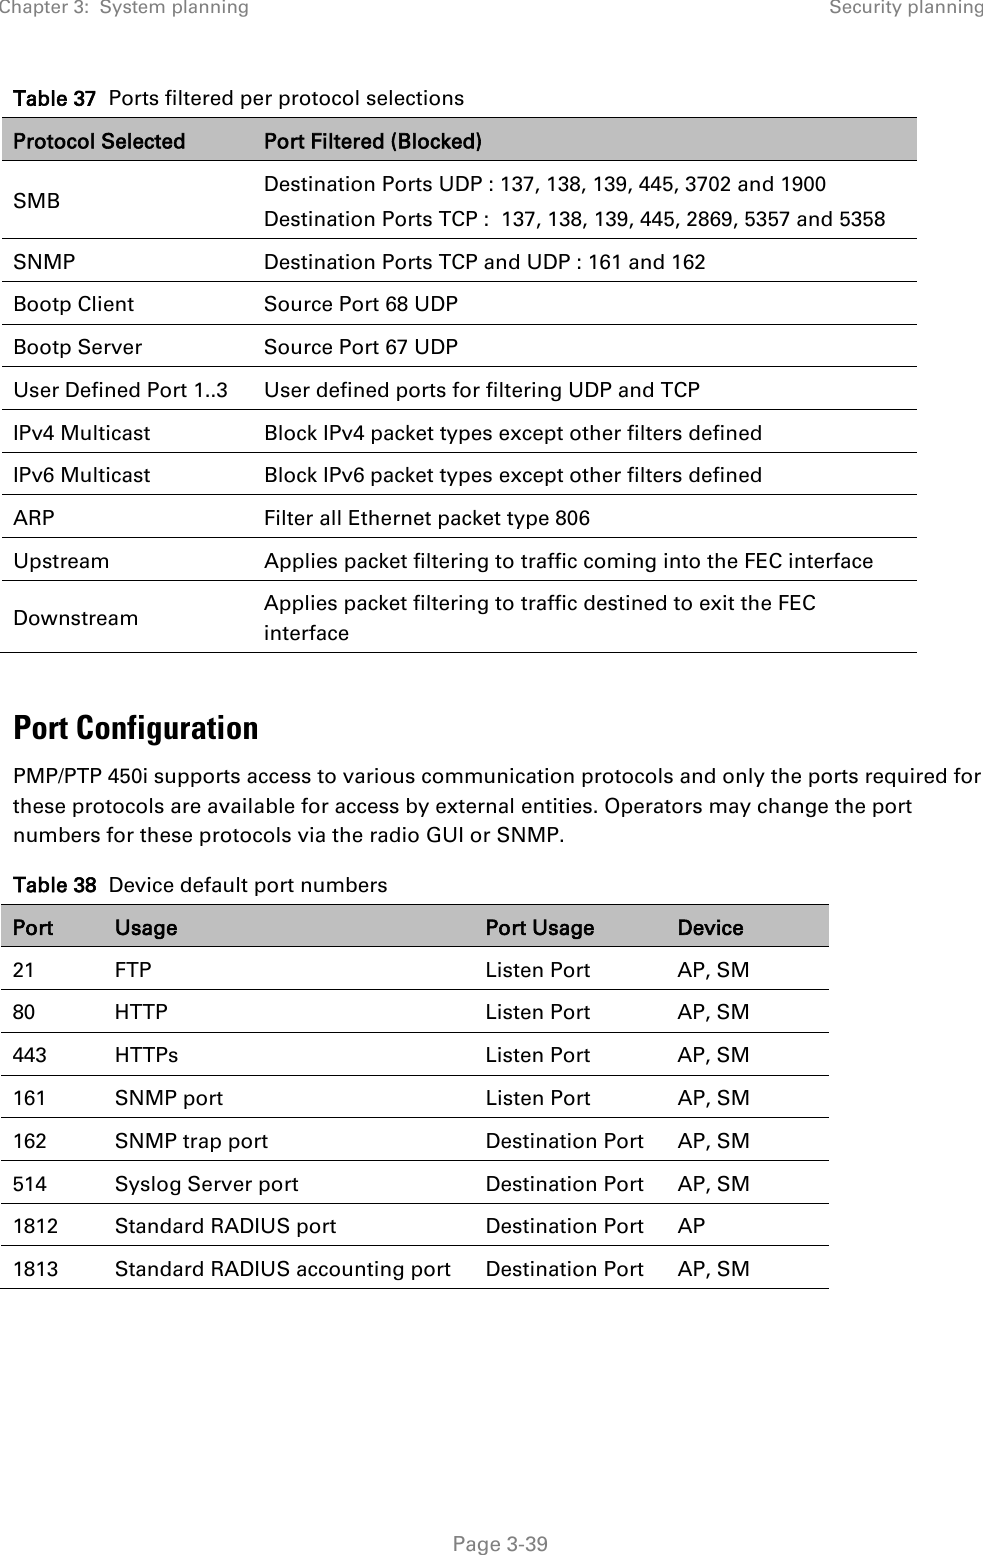 Chapter 3:  System planning Security planning   Page 3-39 Table 37  Ports filtered per protocol selections   Port Configuration PMP/PTP 450i supports access to various communication protocols and only the ports required for these protocols are available for access by external entities. Operators may change the port numbers for these protocols via the radio GUI or SNMP. Table 38  Device default port numbers Port Usage Port Usage Device 21 FTP Listen Port AP, SM 80 HTTP Listen Port AP, SM 443 HTTPs  Listen Port AP, SM 161 SNMP port Listen Port AP, SM 162 SNMP trap port Destination Port AP, SM 514 Syslog Server port Destination Port AP, SM 1812 Standard RADIUS port Destination Port AP 1813 Standard RADIUS accounting port Destination Port AP, SM    Protocol Selected Port Filtered (Blocked) SMB Destination Ports UDP : 137, 138, 139, 445, 3702 and 1900 Destination Ports TCP :  137, 138, 139, 445, 2869, 5357 and 5358 SNMP Destination Ports TCP and UDP : 161 and 162 Bootp Client Source Port 68 UDP Bootp Server Source Port 67 UDP User Defined Port 1..3 User defined ports for filtering UDP and TCP IPv4 Multicast Block IPv4 packet types except other filters defined IPv6 Multicast Block IPv6 packet types except other filters defined ARP Filter all Ethernet packet type 806 Upstream  Applies packet filtering to traffic coming into the FEC interface Downstream Applies packet filtering to traffic destined to exit the FEC interface 